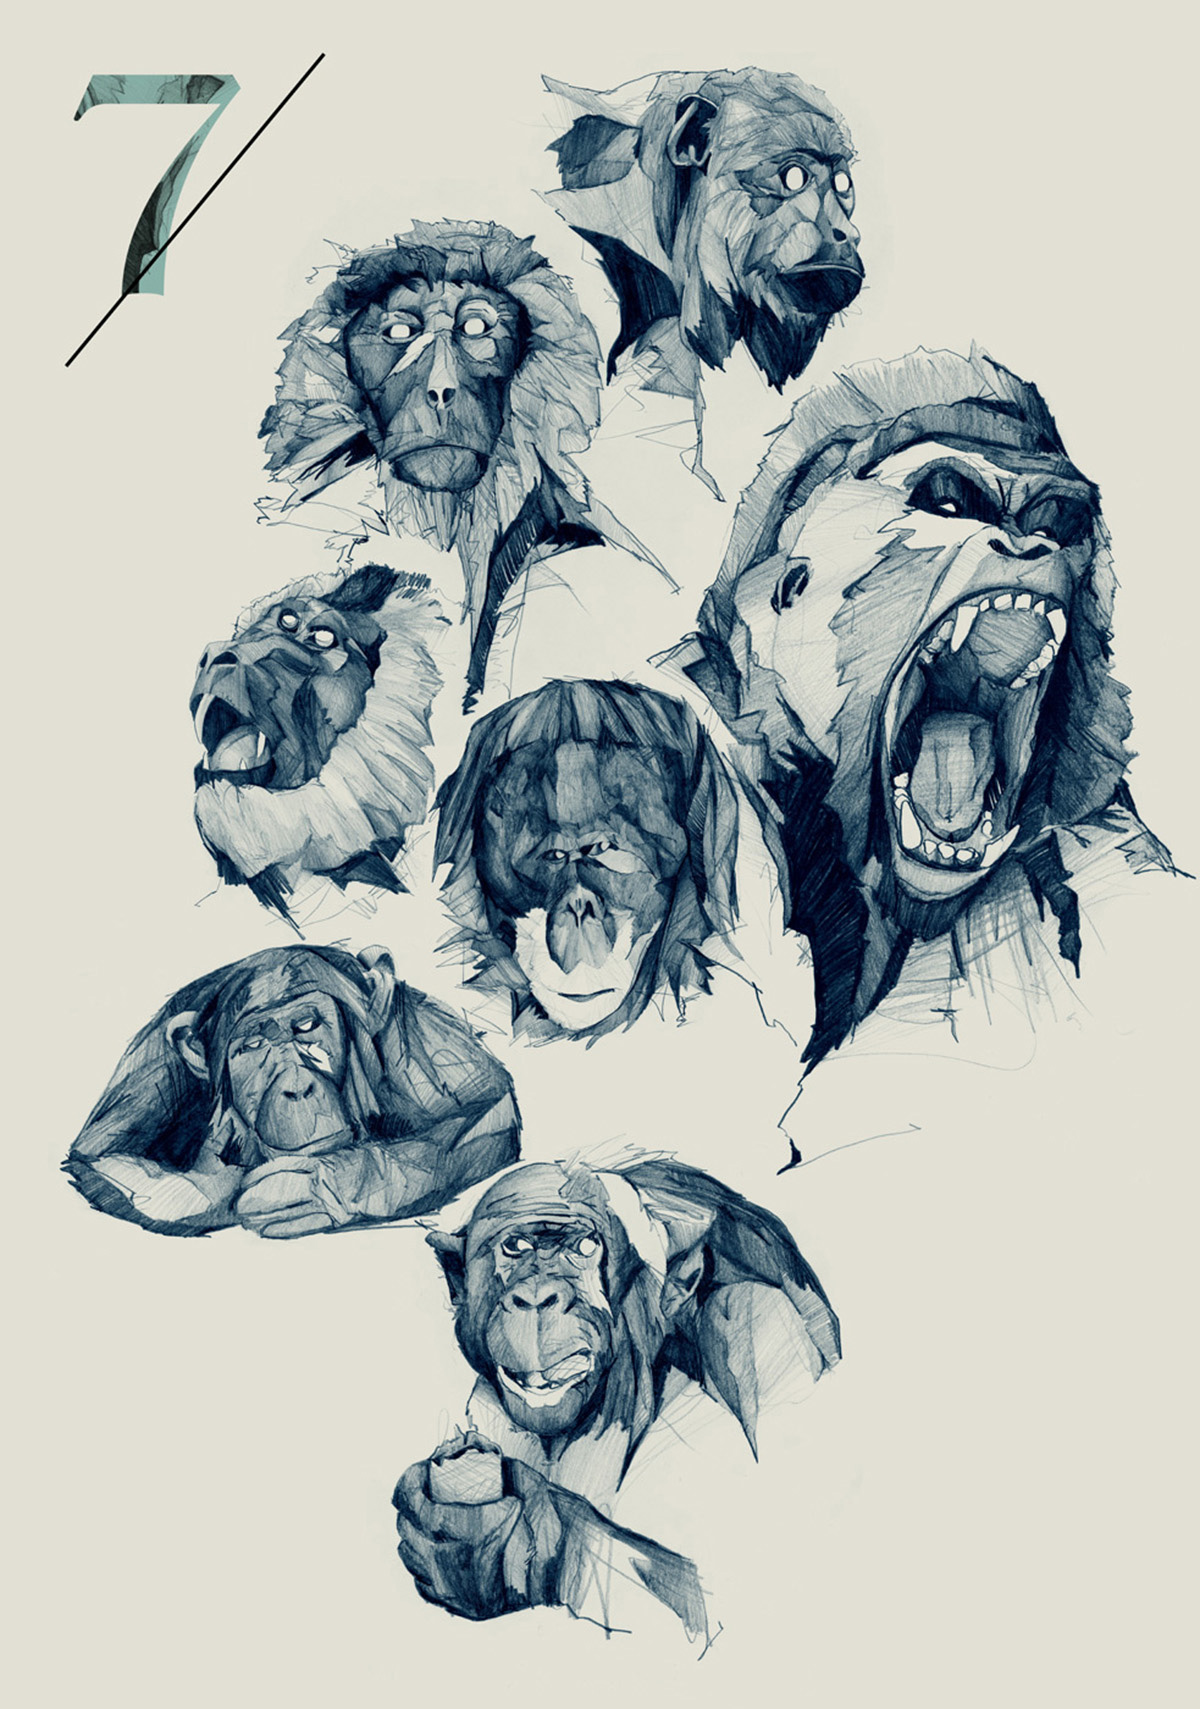 Rite of Spring by Brian Ziff | Monkey, Illustrations and Sketches